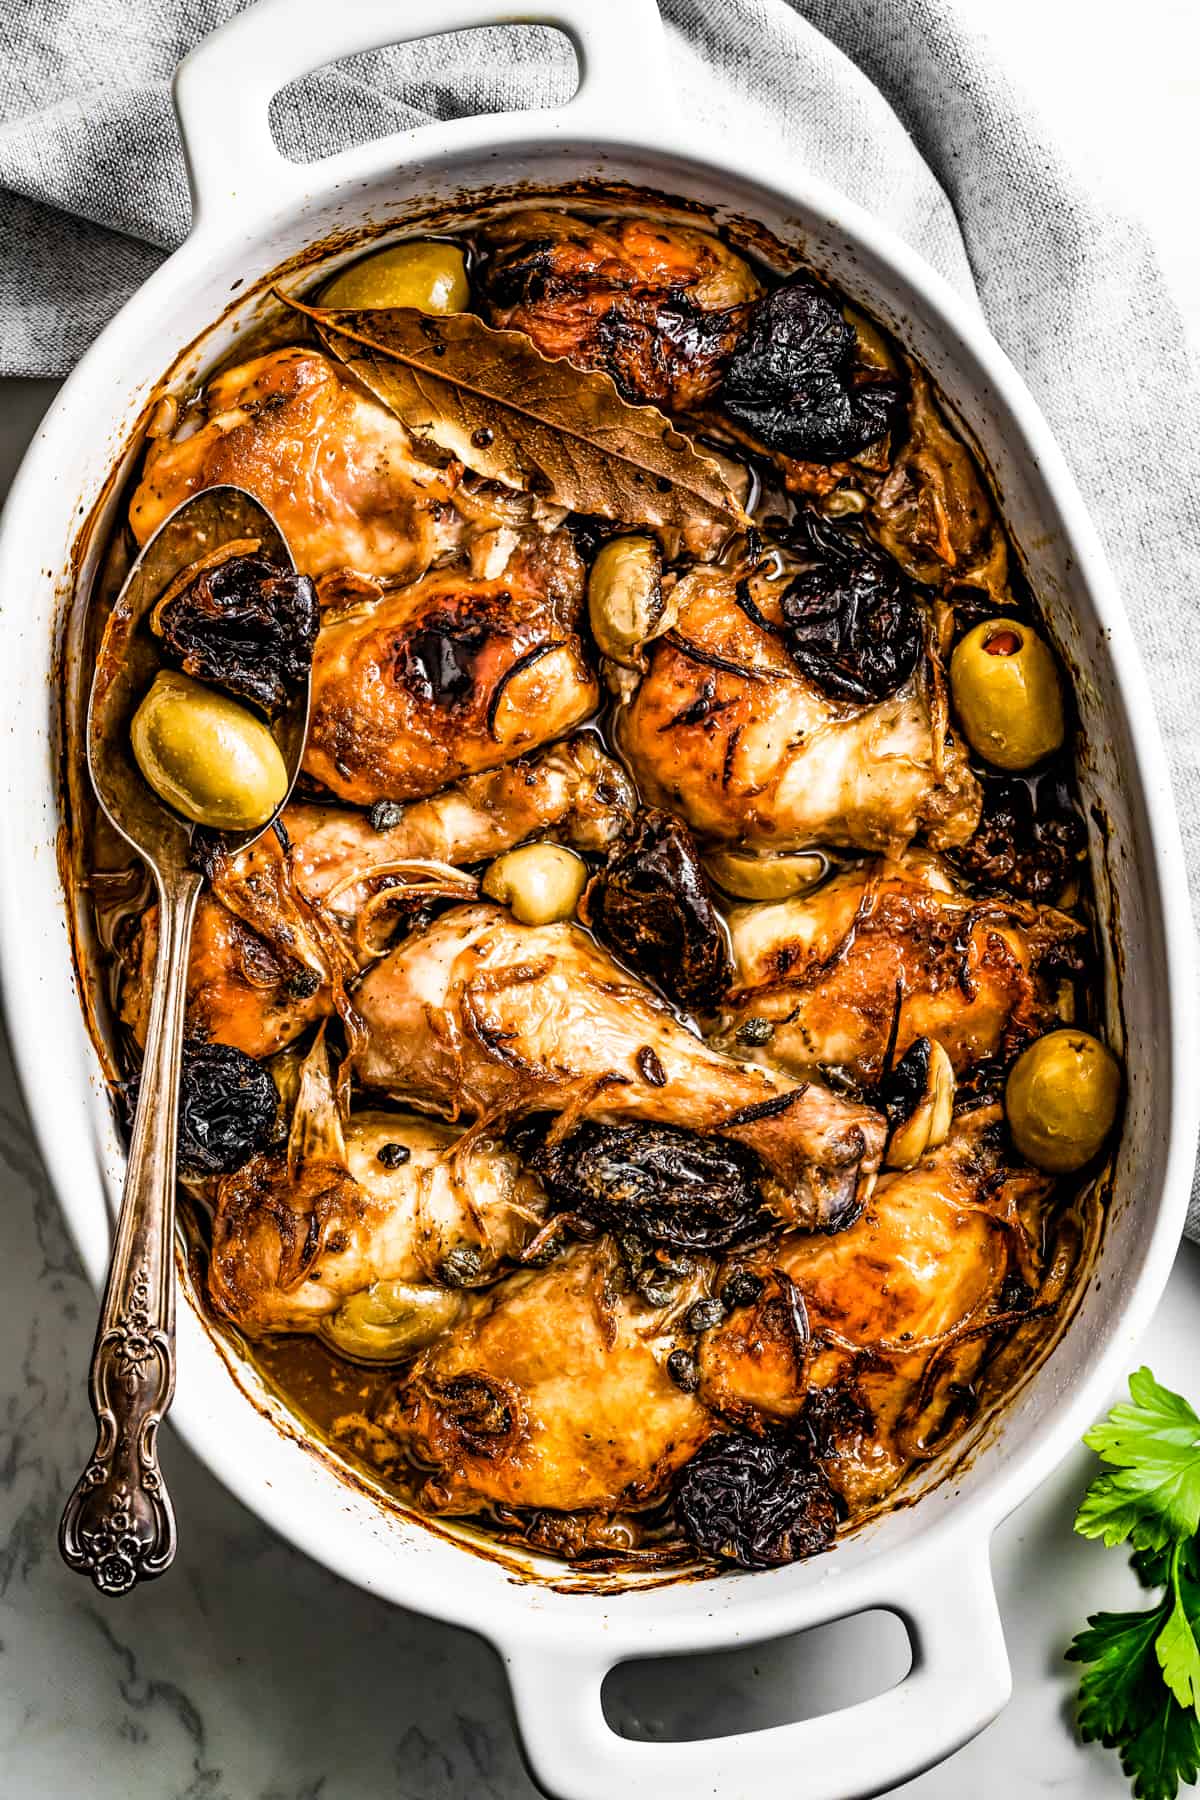 Easy chicken Marbella in a baking dish, with a gray kitchen towel placed above the baking dish.